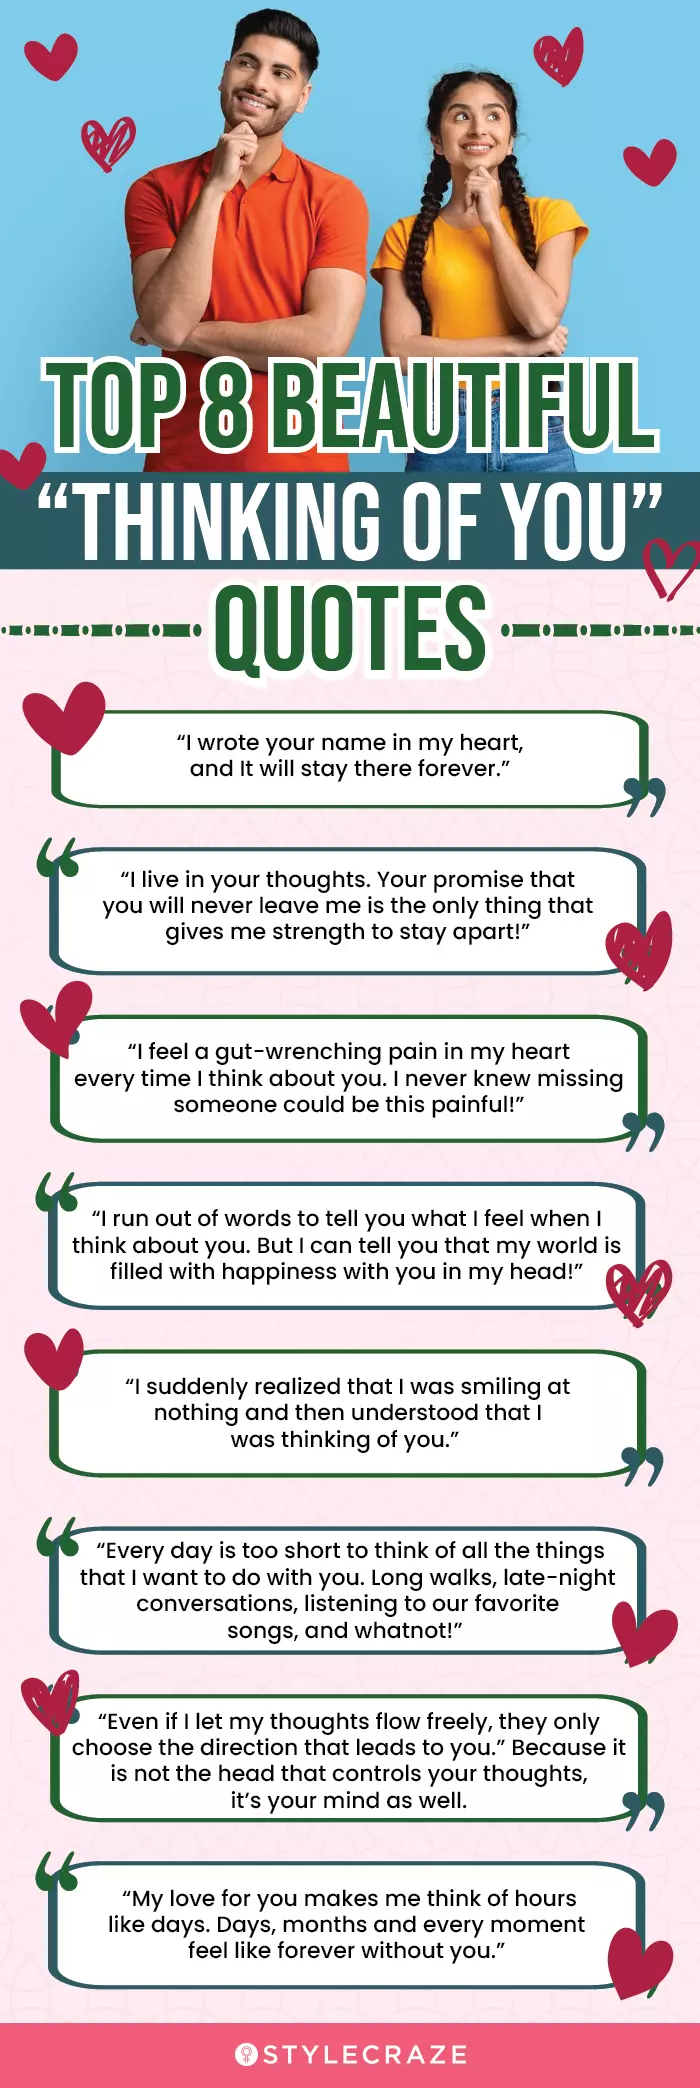 top 8 beautiful “thinking of you” quotes (infographic)